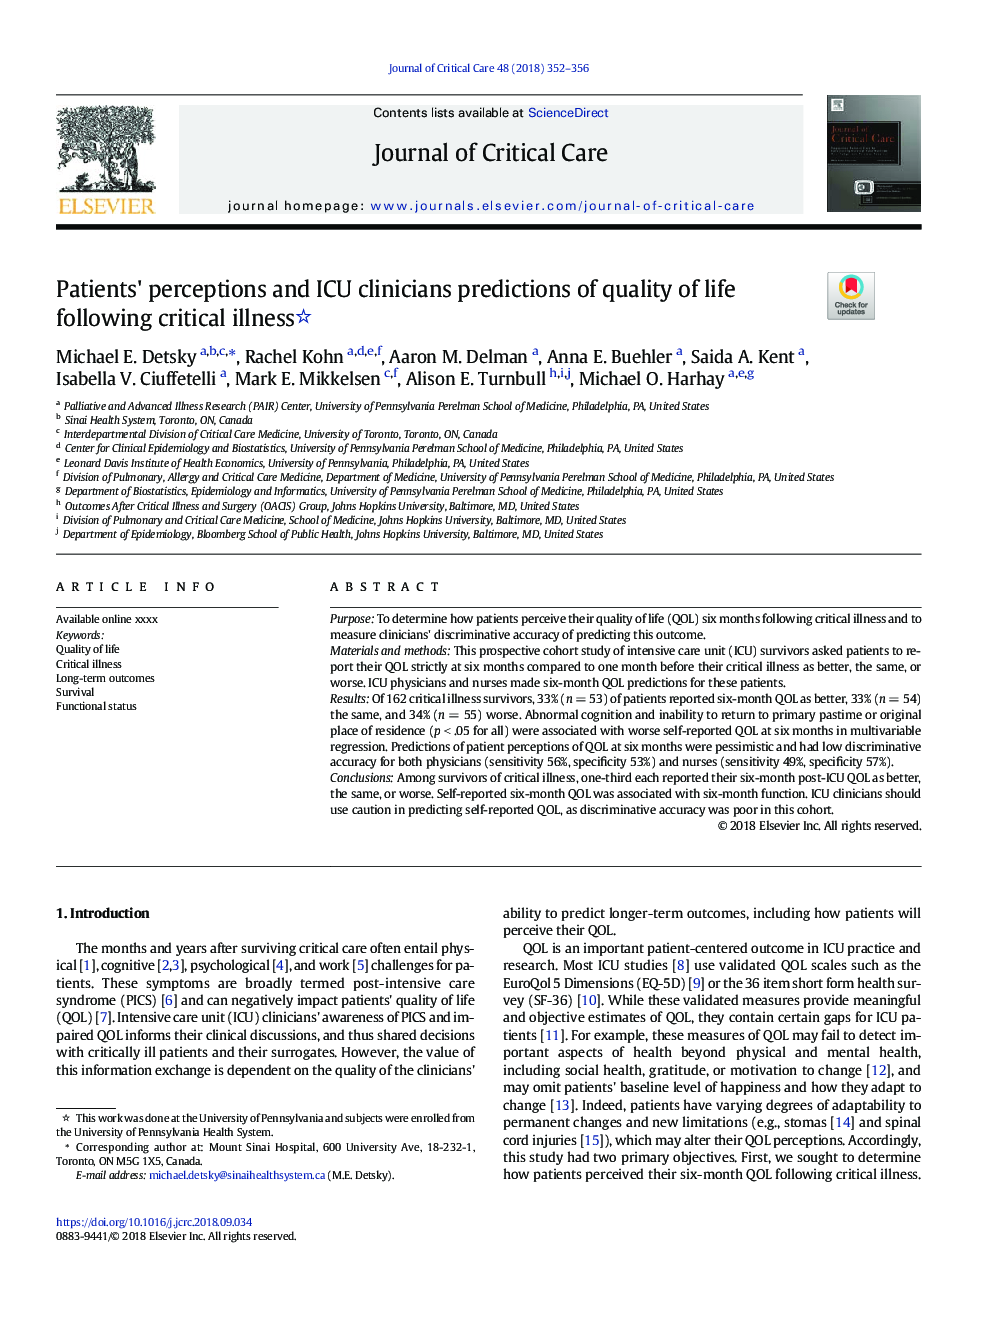 Patients' perceptions and ICU clinicians predictions of quality of life following critical illness